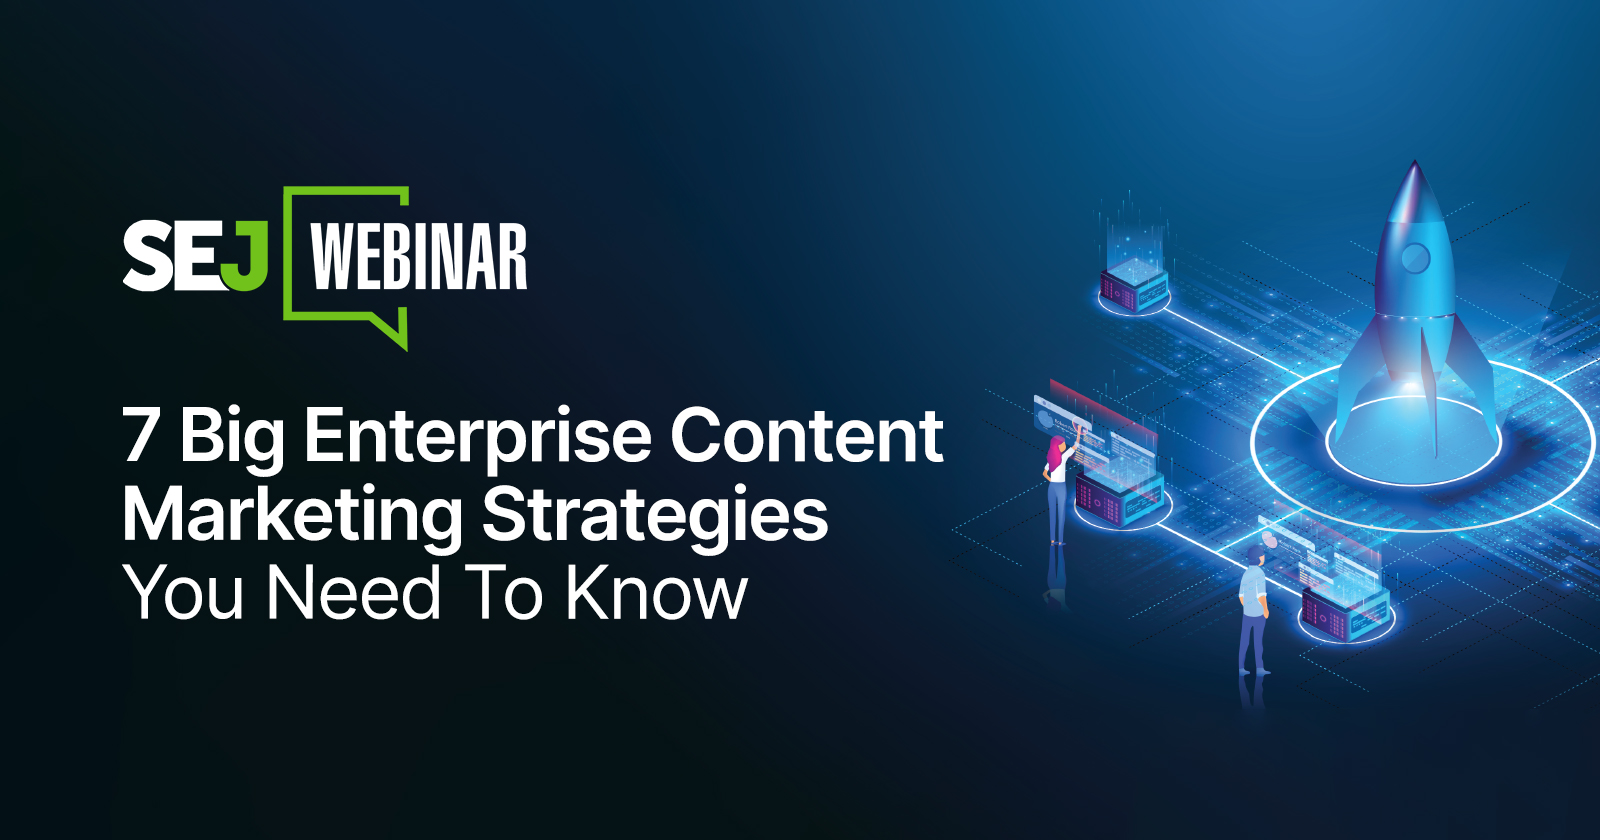 7 Big Enterprise Content Marketing Strategies You Need To Know via @sejournal, @hethr_campbell